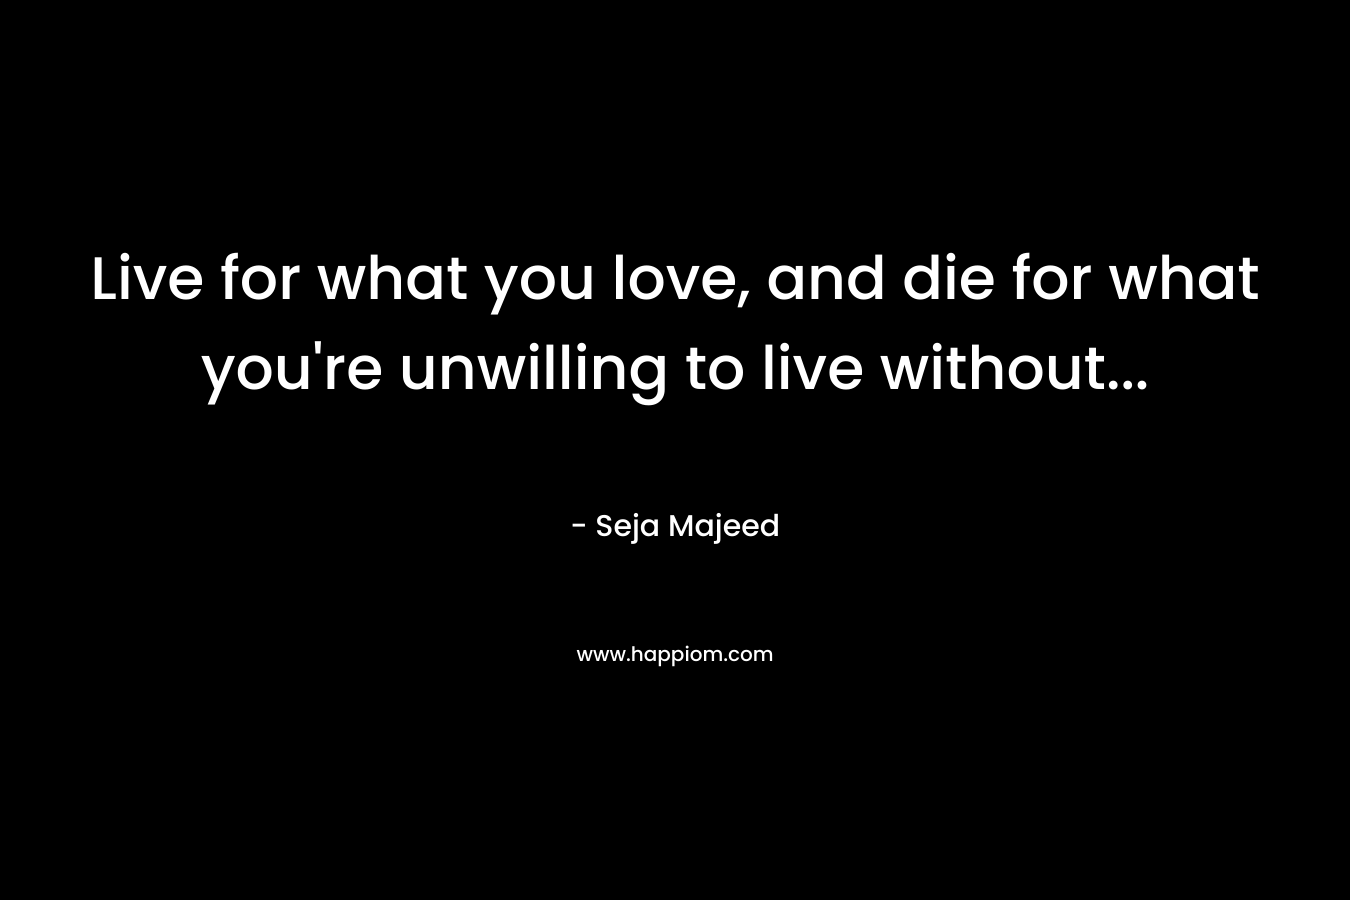 Live for what you love, and die for what you're unwilling to live without...